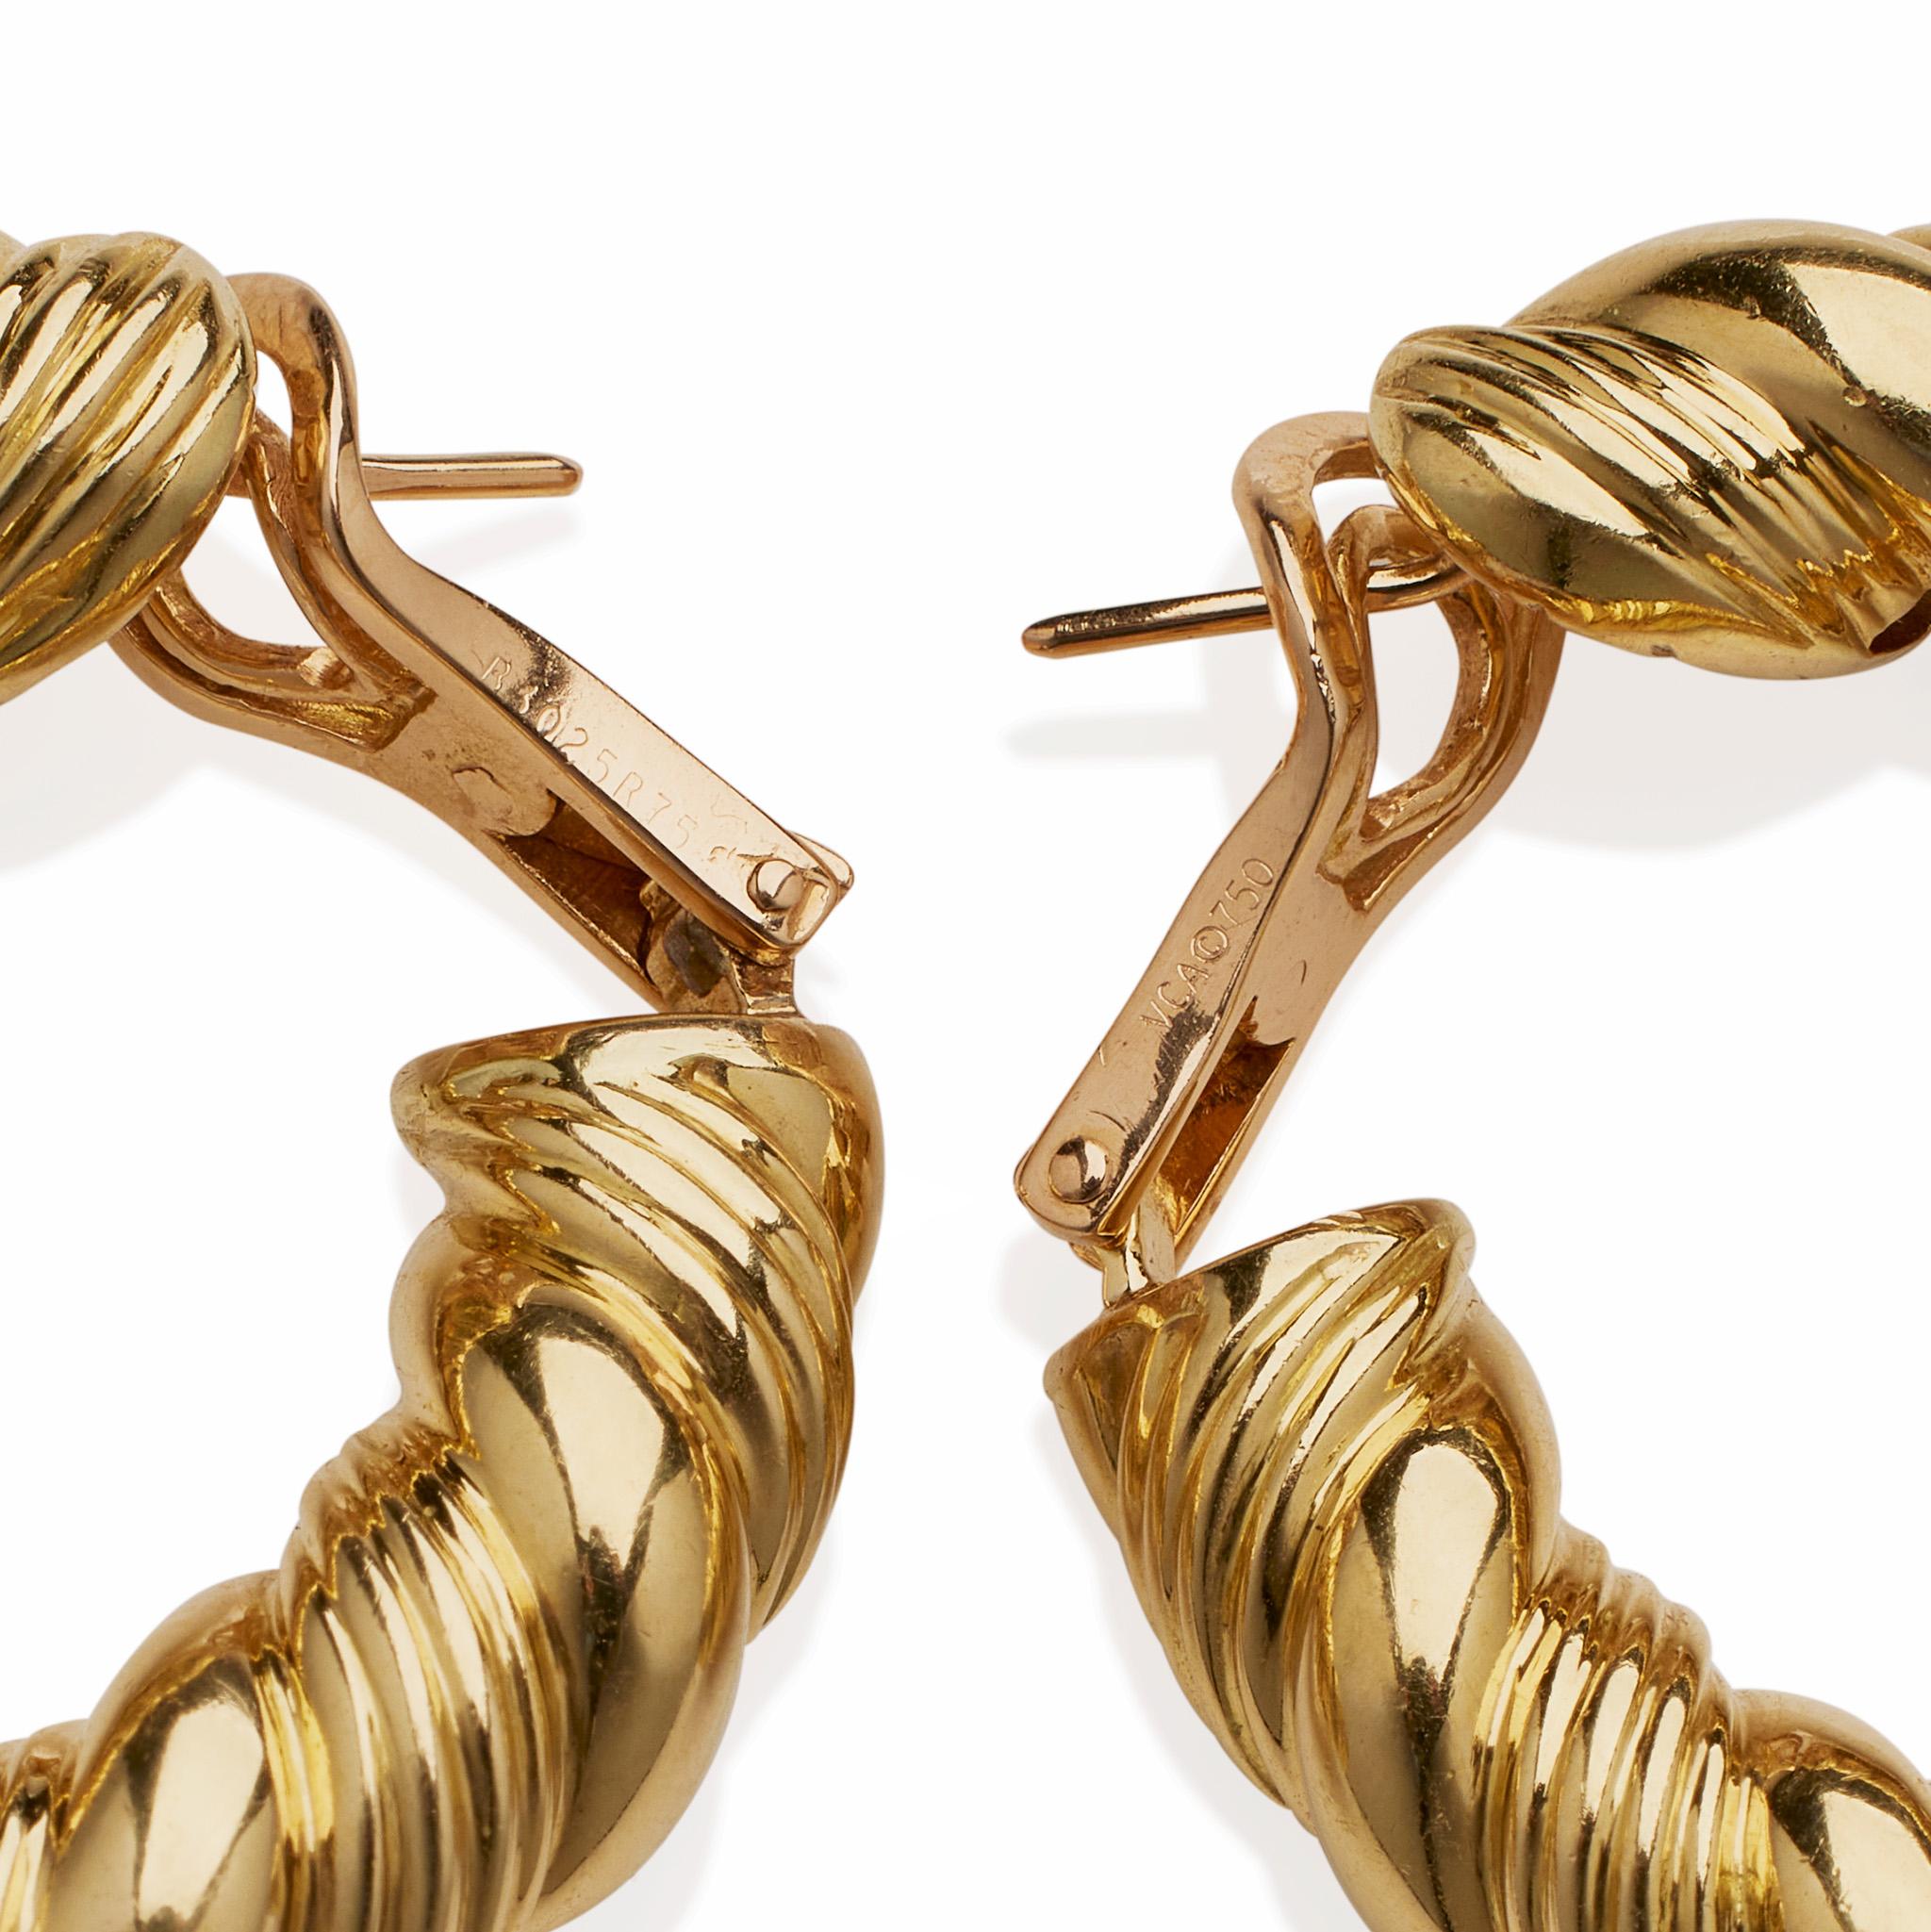 Van Cleef & Arpels Paris 18K Gold Twisted Hoop Earrings In Excellent Condition For Sale In New York, NY